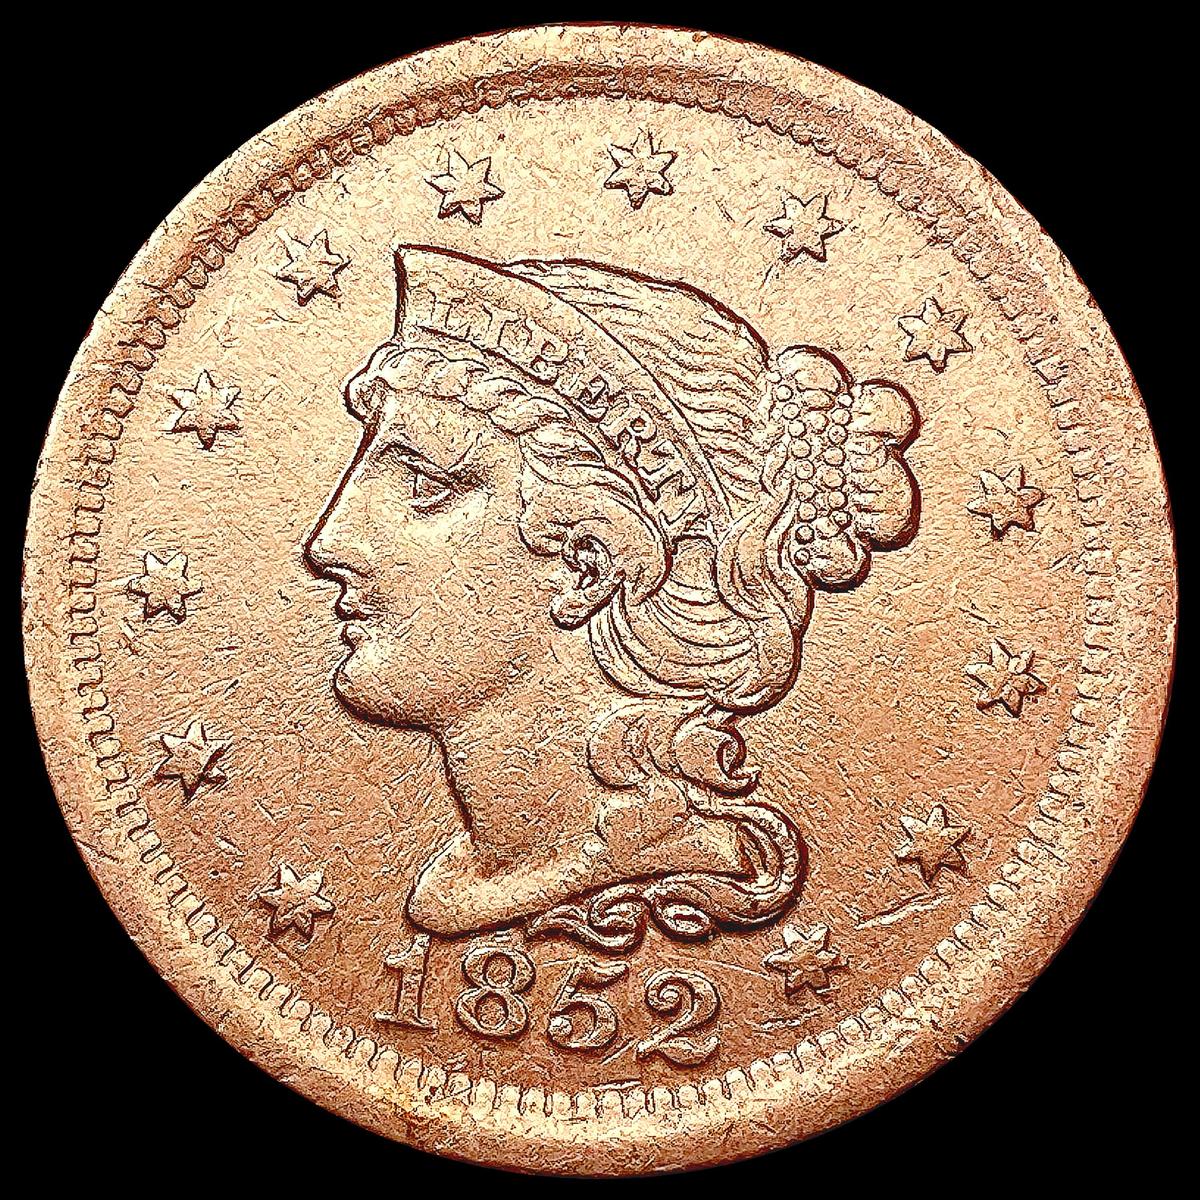 1852 Braided Hair Large Cent CLOSELY UNCIRCULATED